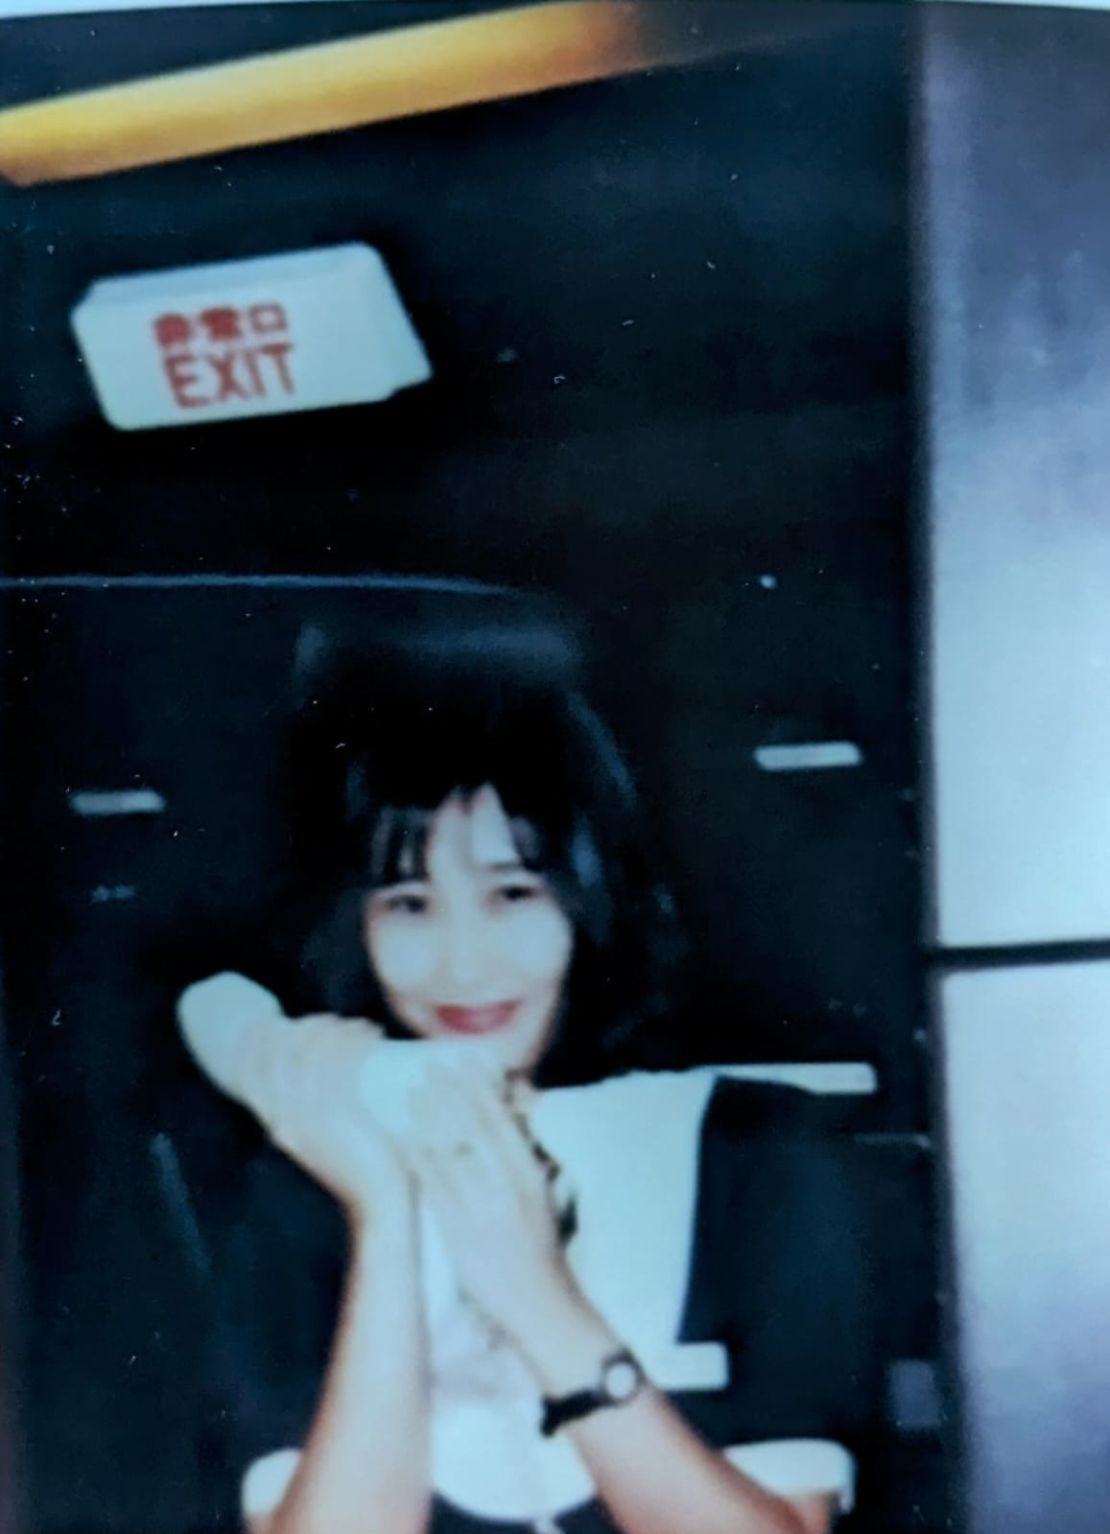 Tottori, pictured in 1985 using an in-flight phone, began her career as a cabin attendant at Japan Airlines.